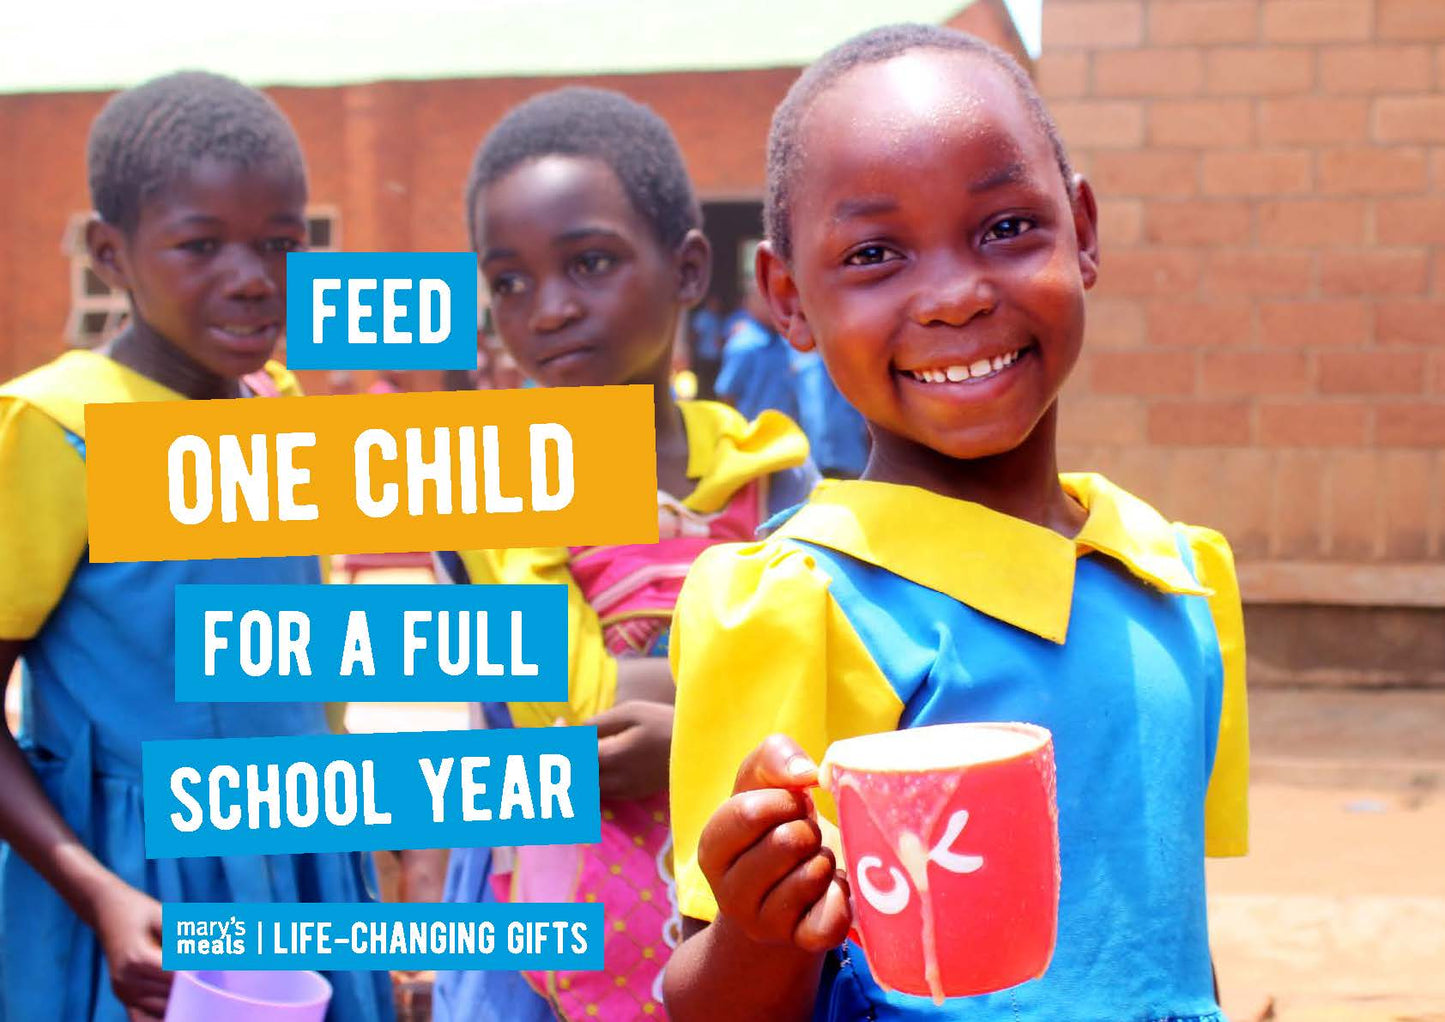 Feed one child for a full school year